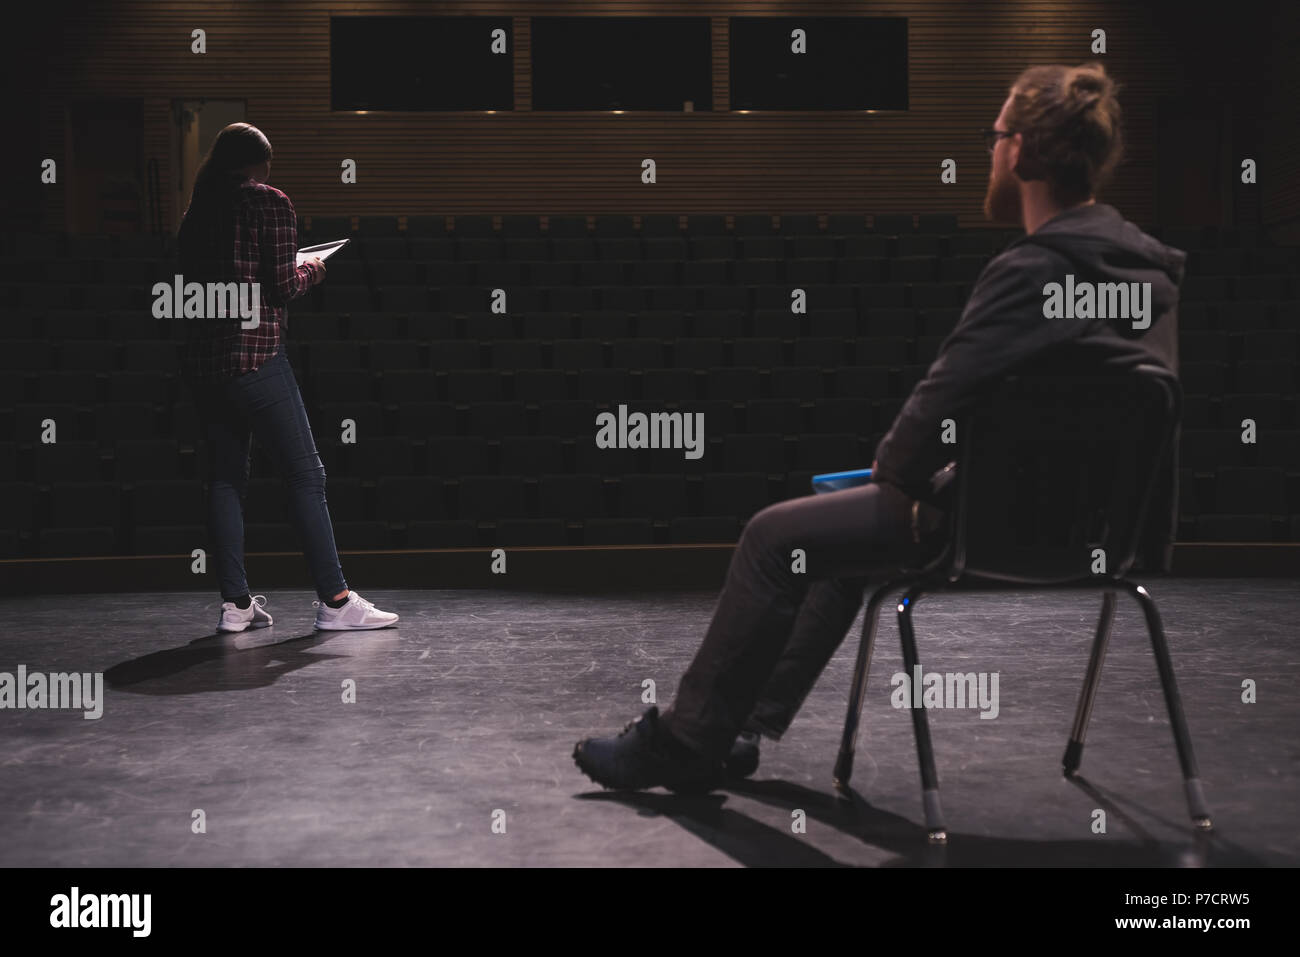 Female actress reading script while male actor looking at her on stage Stock Photo